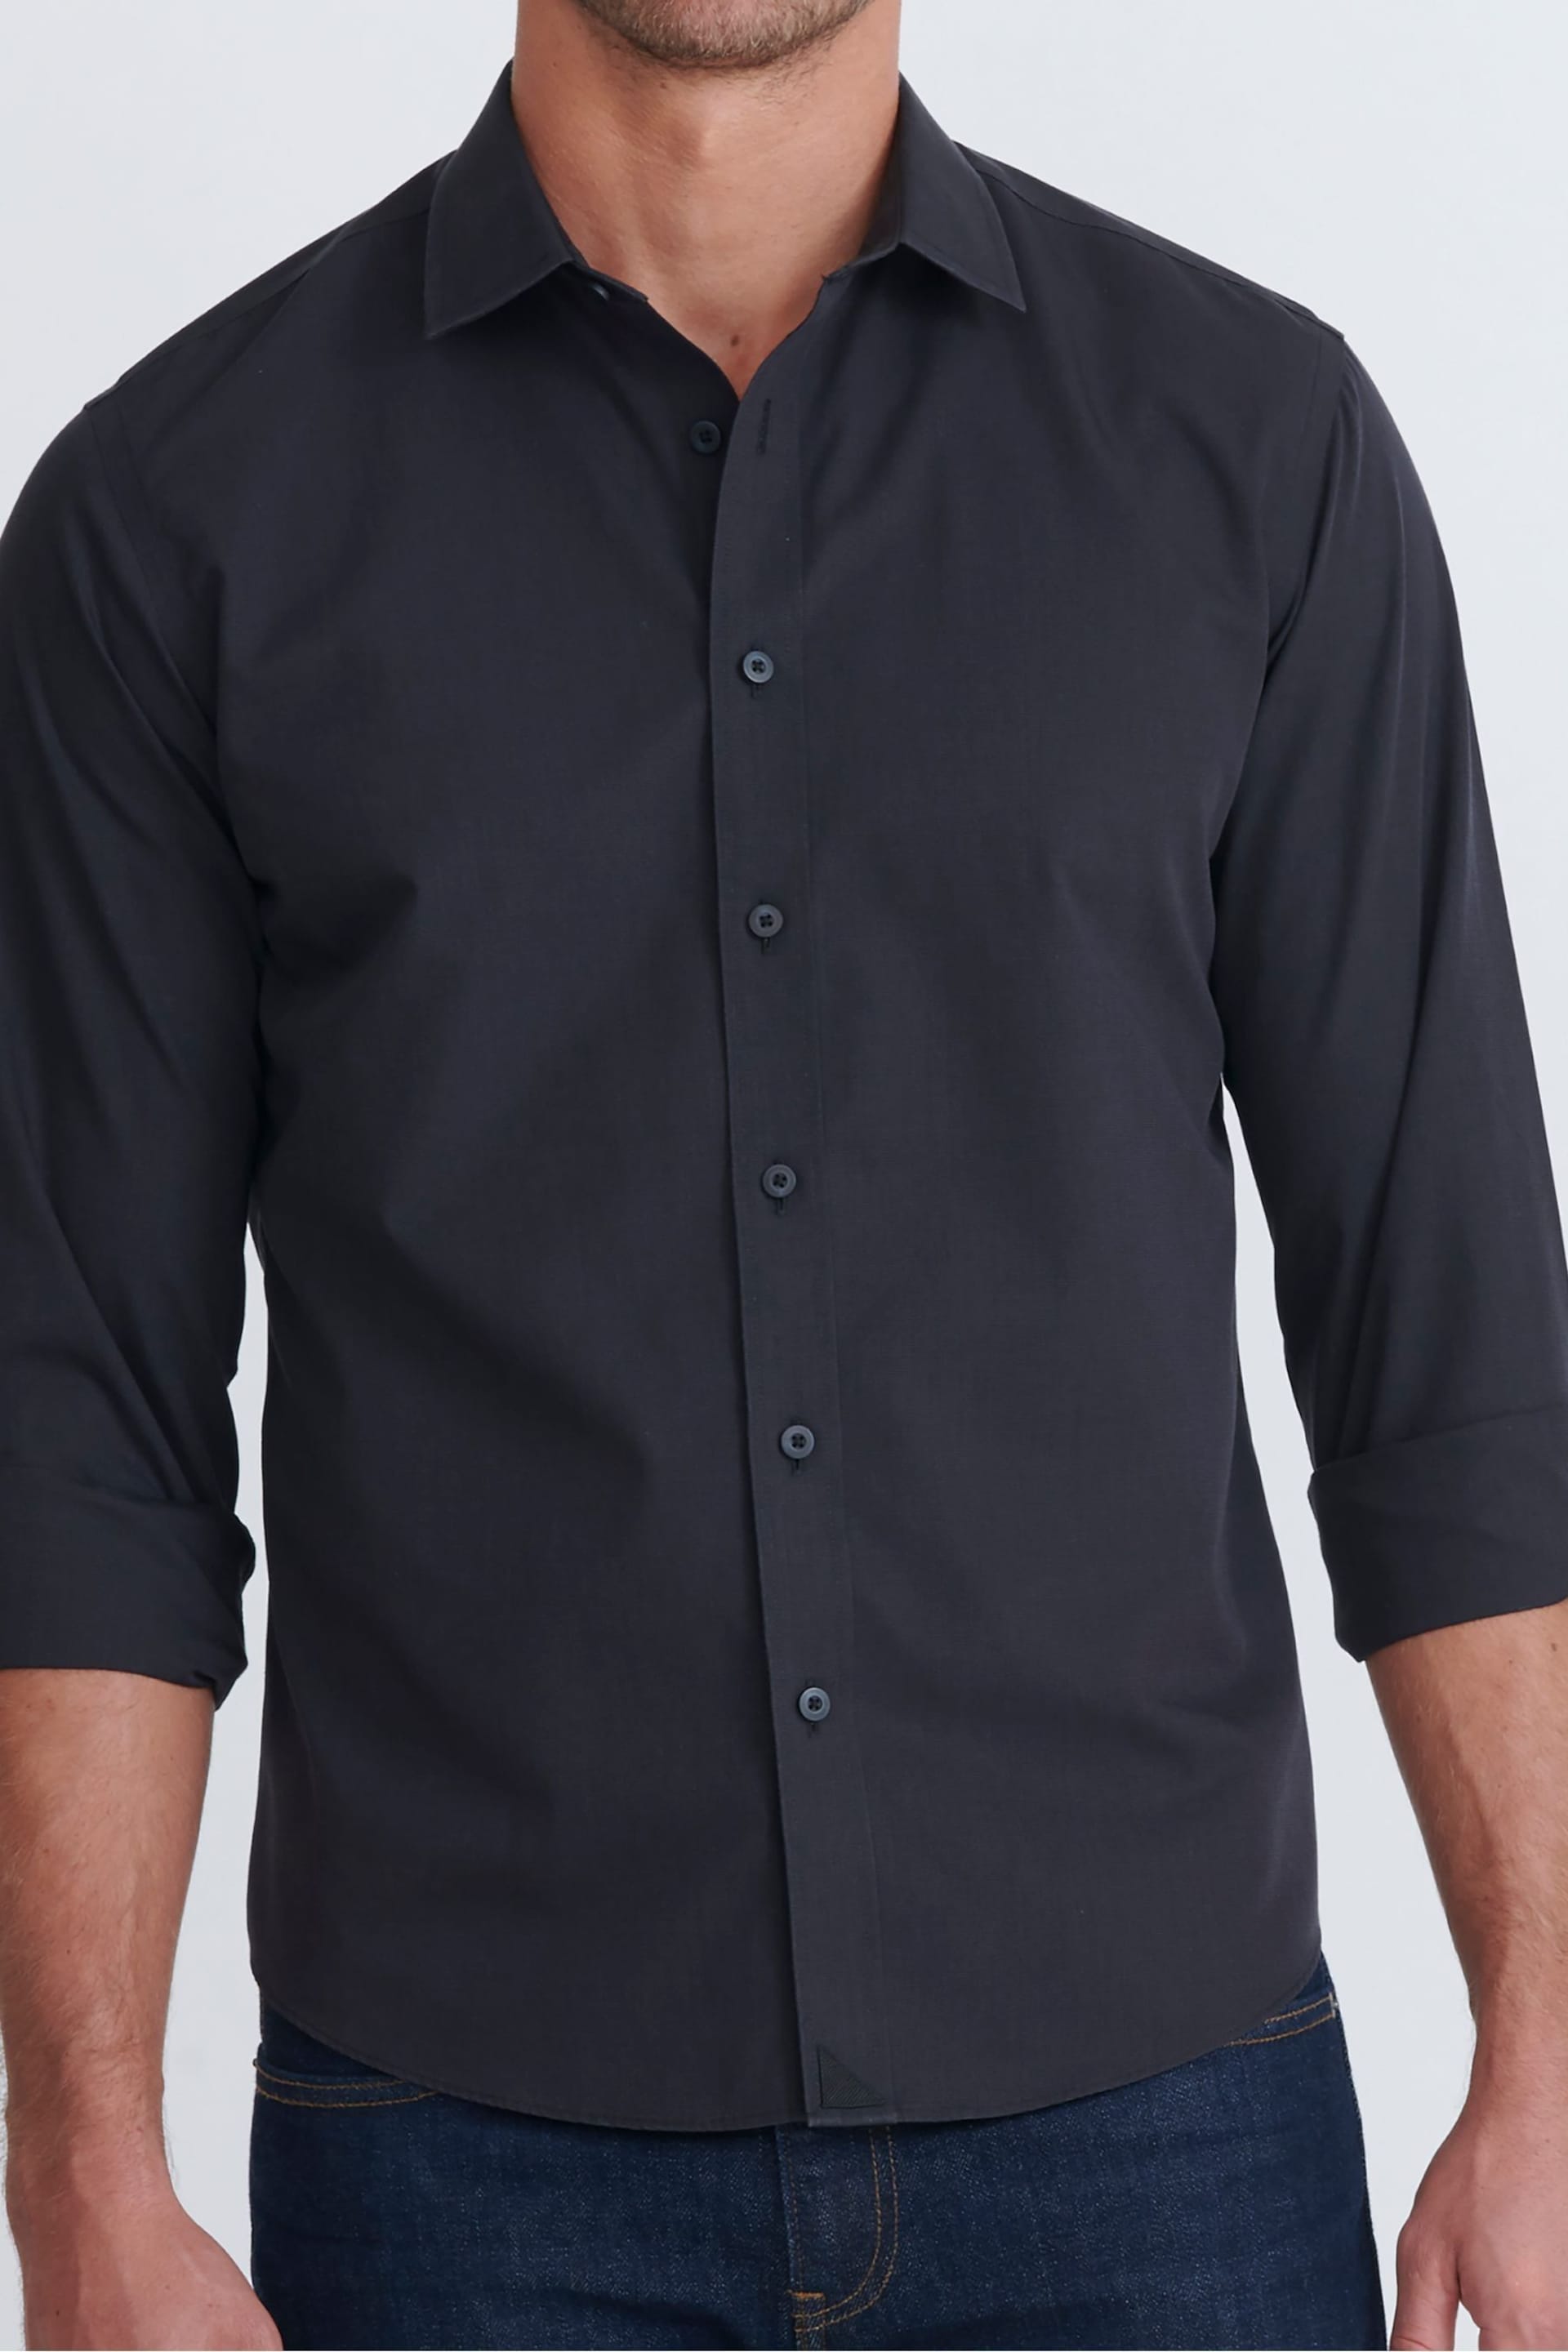 UNTUCKit Black Wrinkle-Free Relaxed Fit Black Stone Shirt - Image 3 of 6